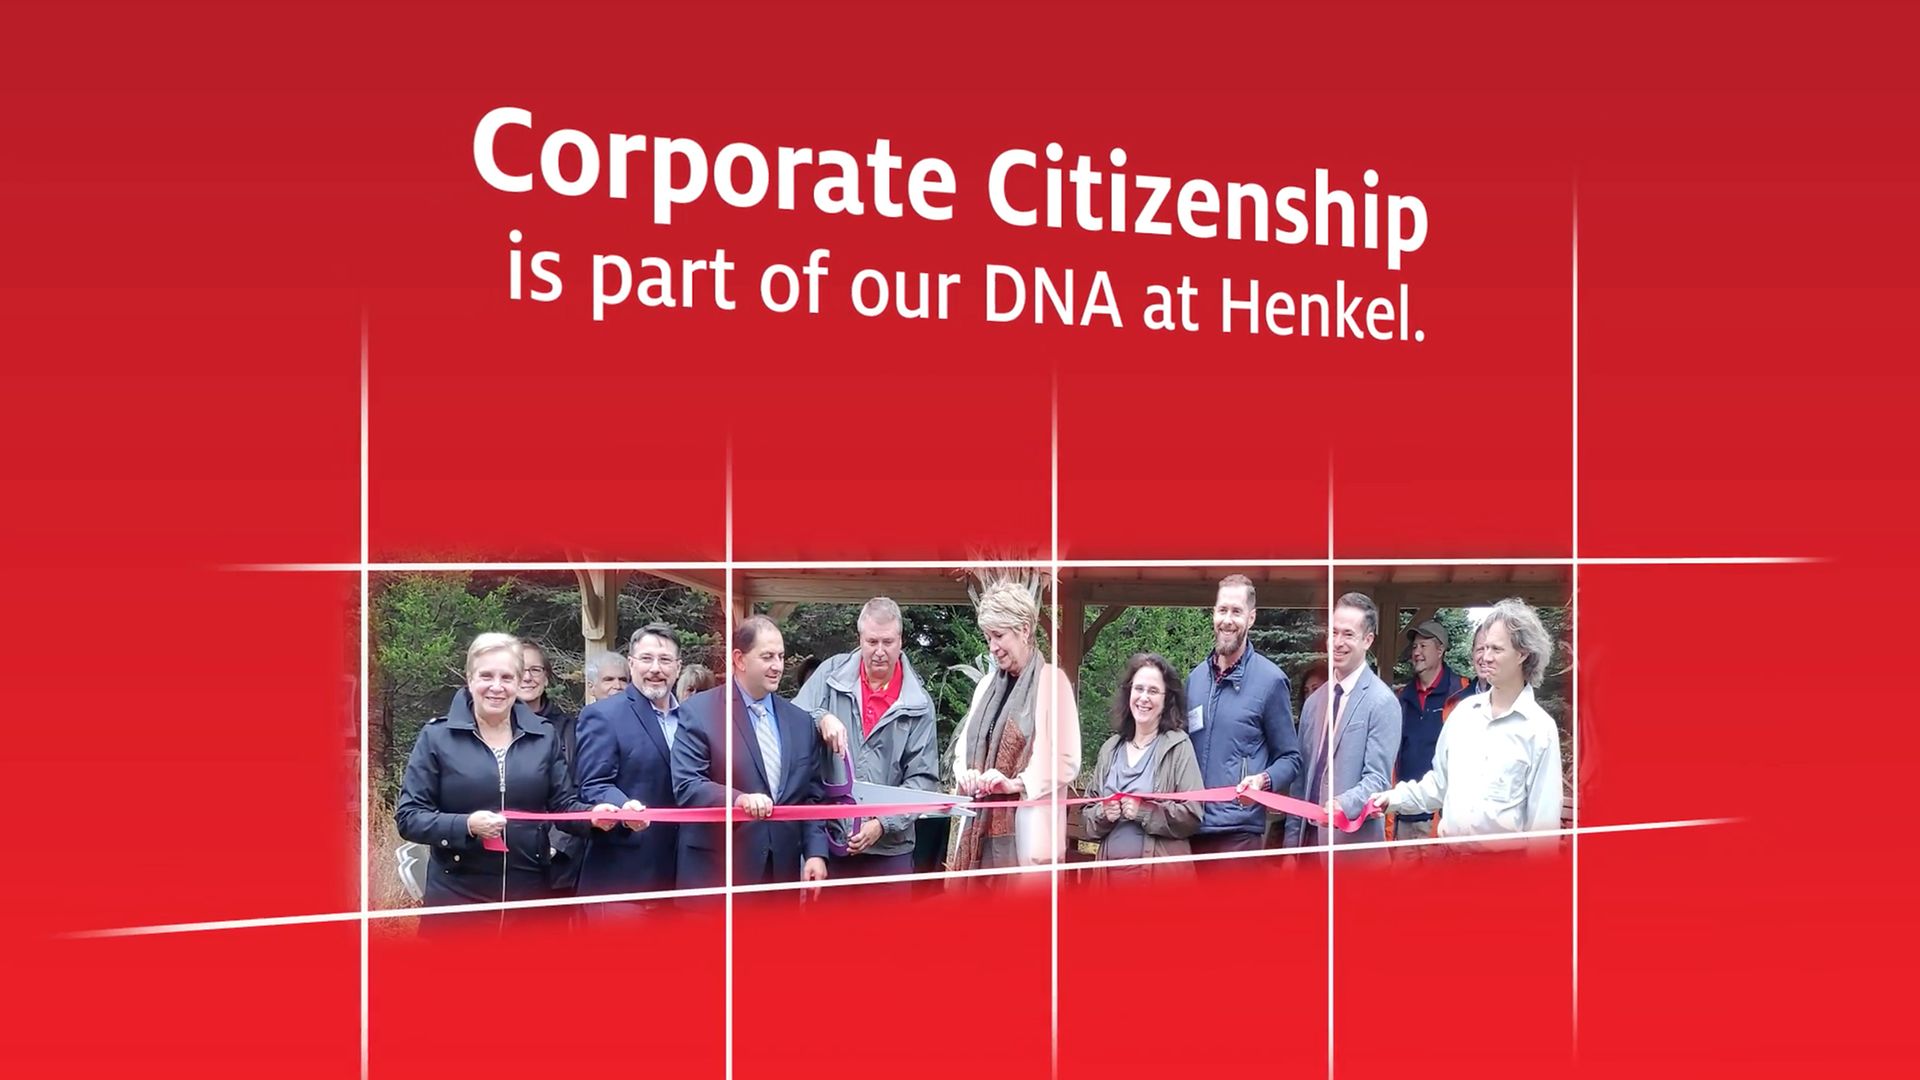 Corporate Citizenship is part of our DNA at Henkel